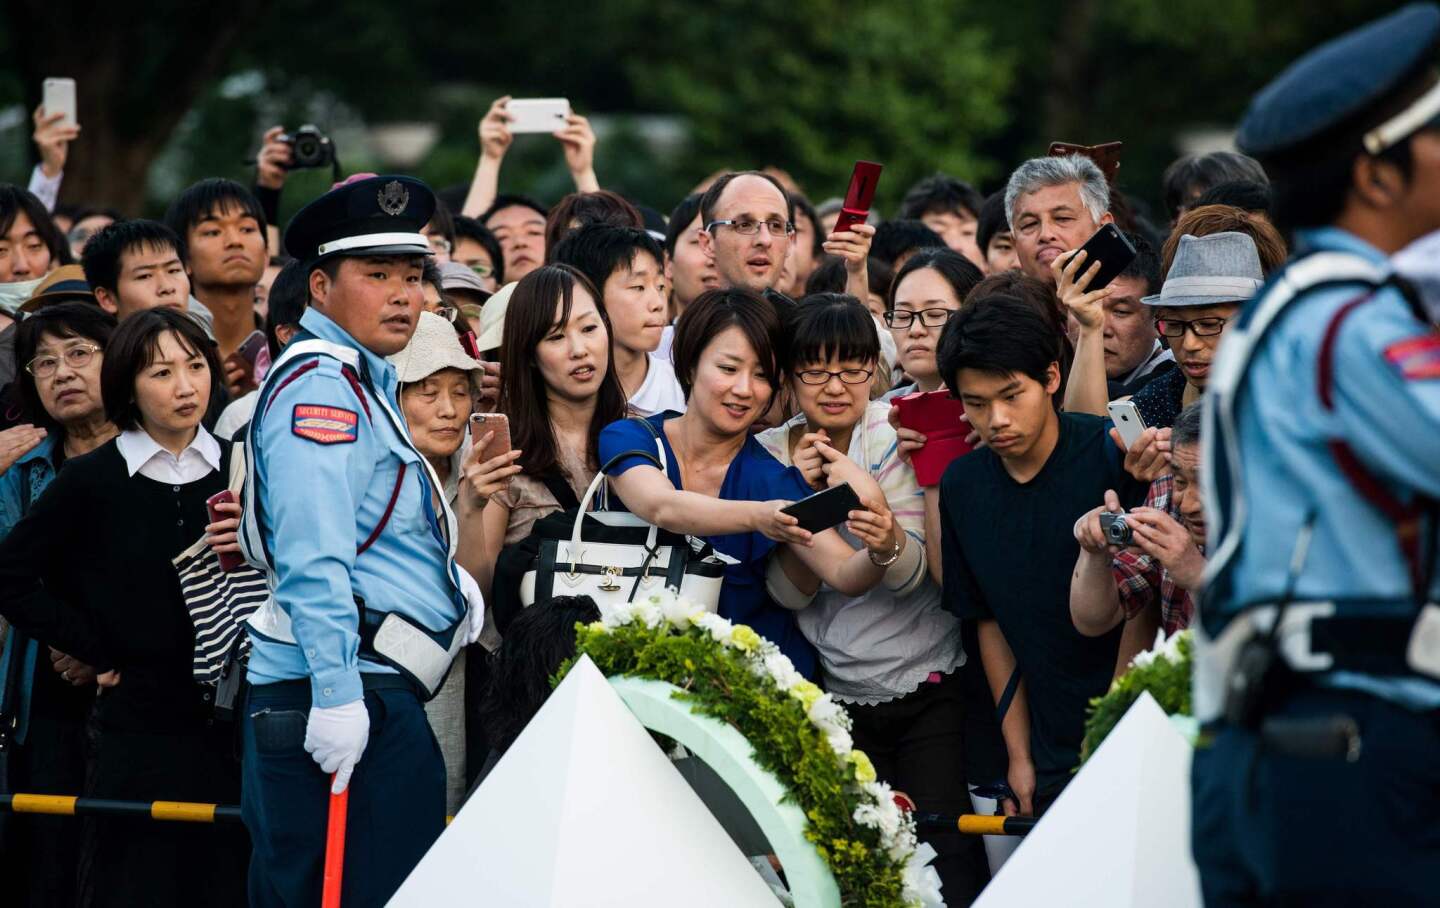 People try to get a glimpse of the wreath laid by President Obama at Hiroshima Peace Memorial Park.